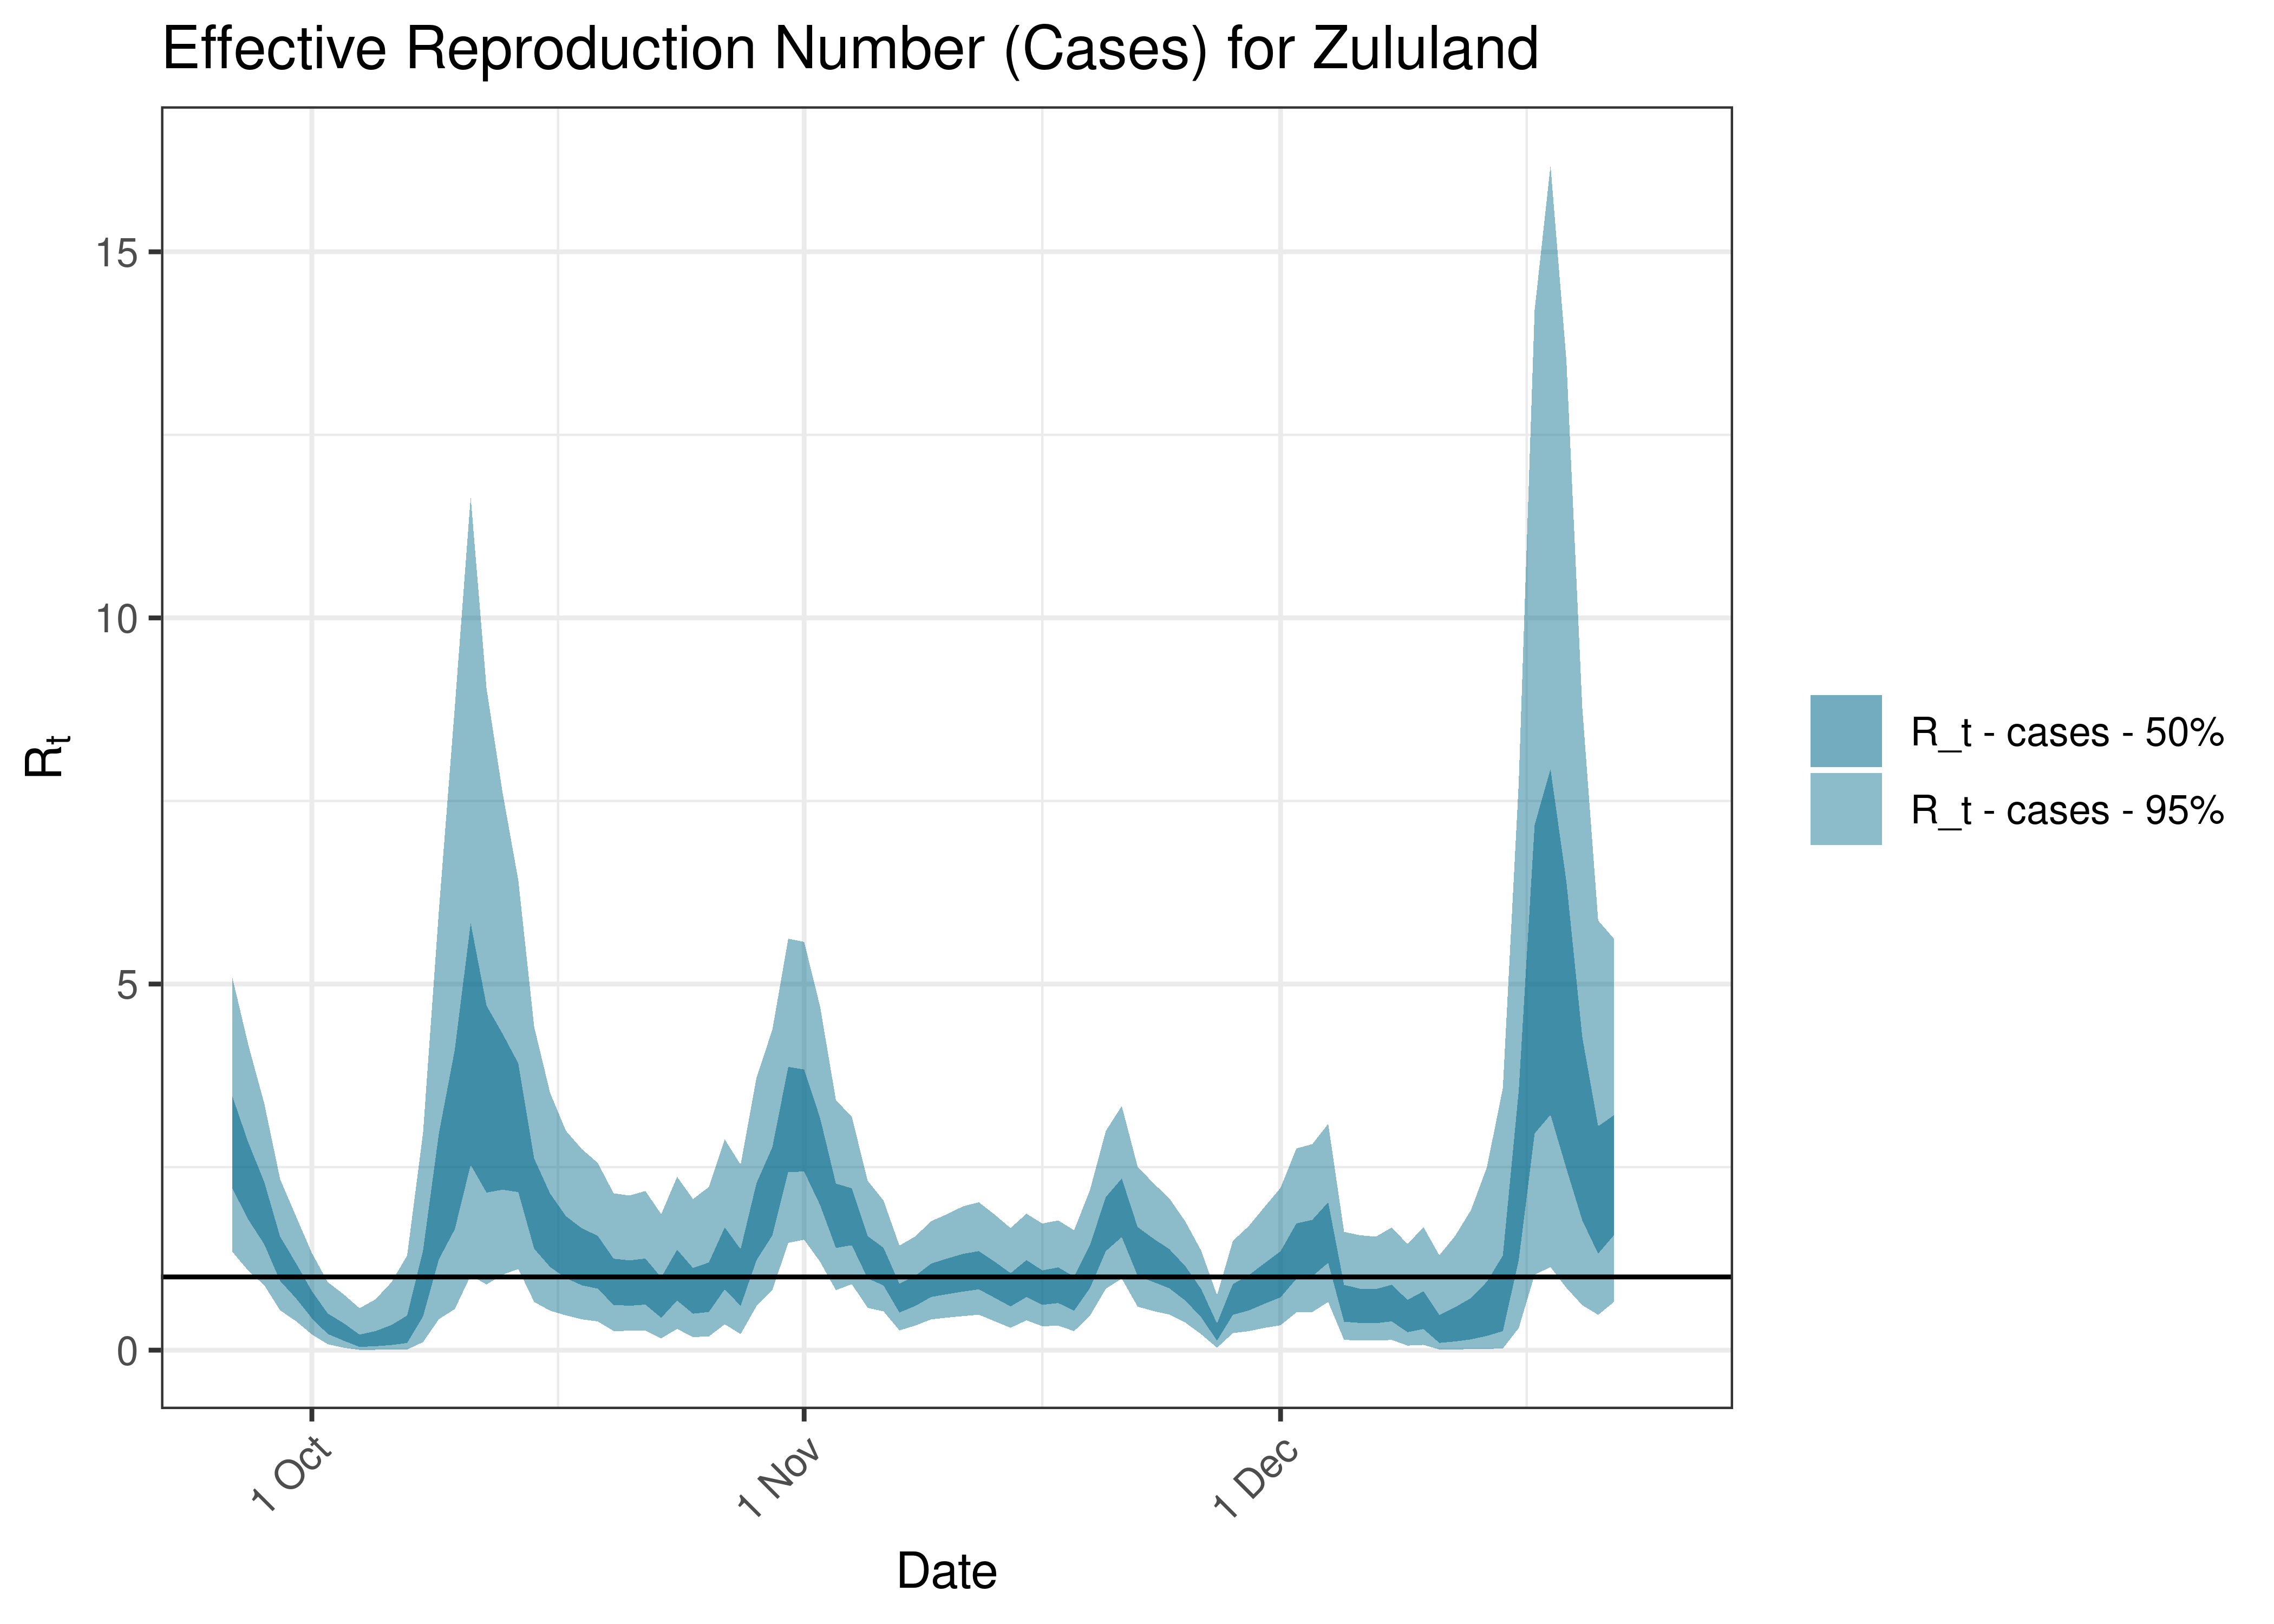 Estimated Effective Reproduction Number Based on Cases for Zululand over last 90 days